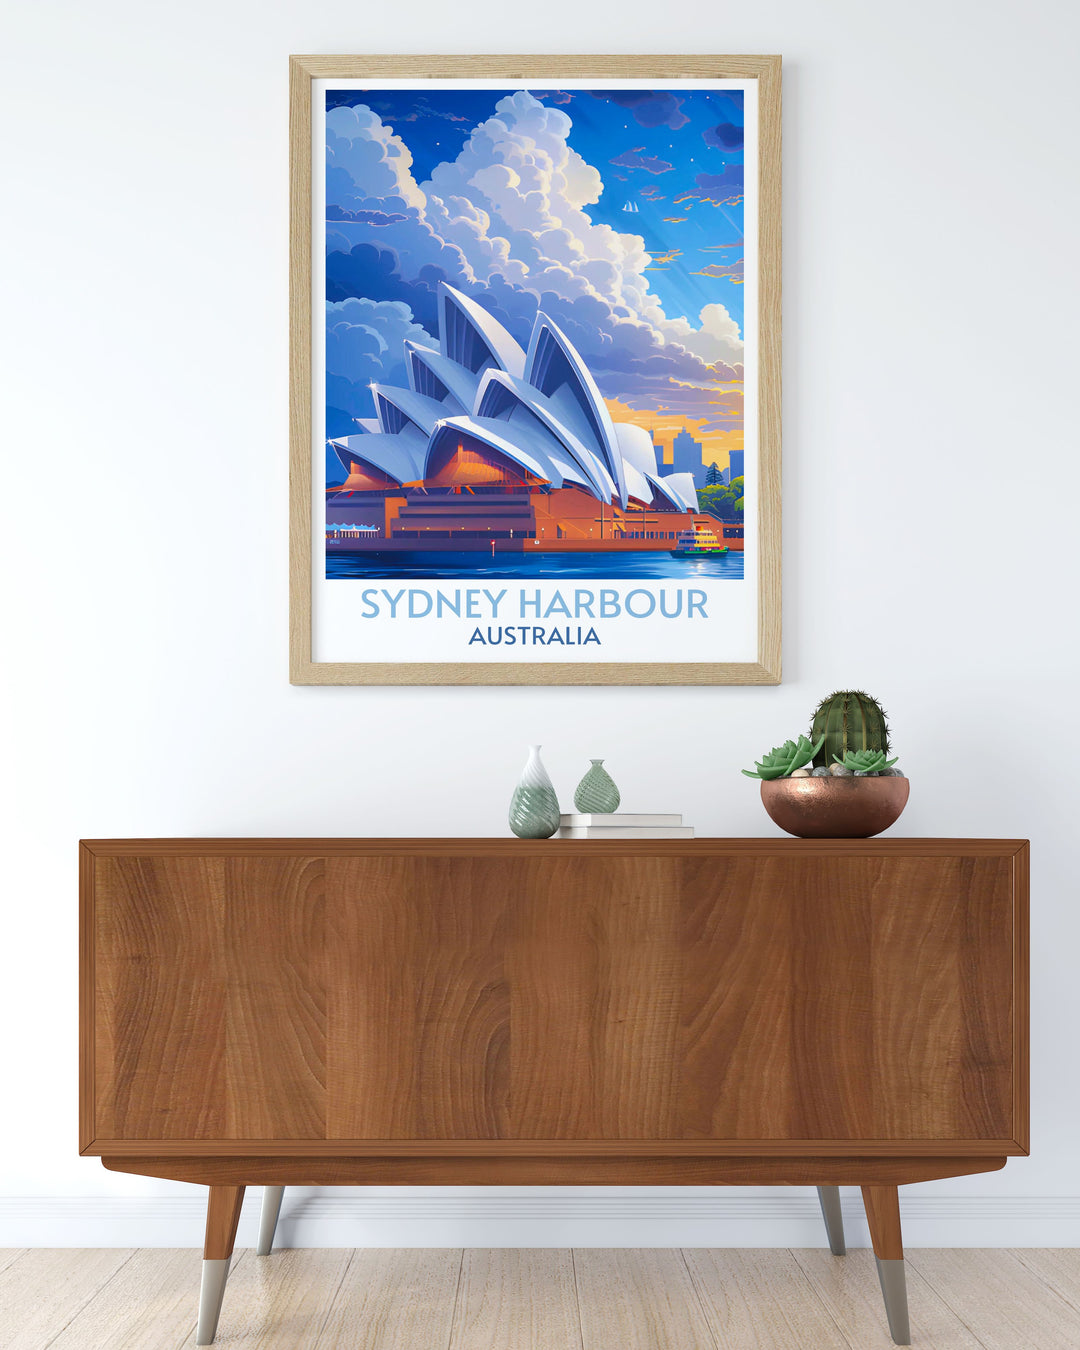 Sydney Harbour Bridge framed print illustrating the majestic structure against the backdrop of the harbor, blending historical significance with contemporary style, perfect for those who appreciate iconic Australian landmarks.